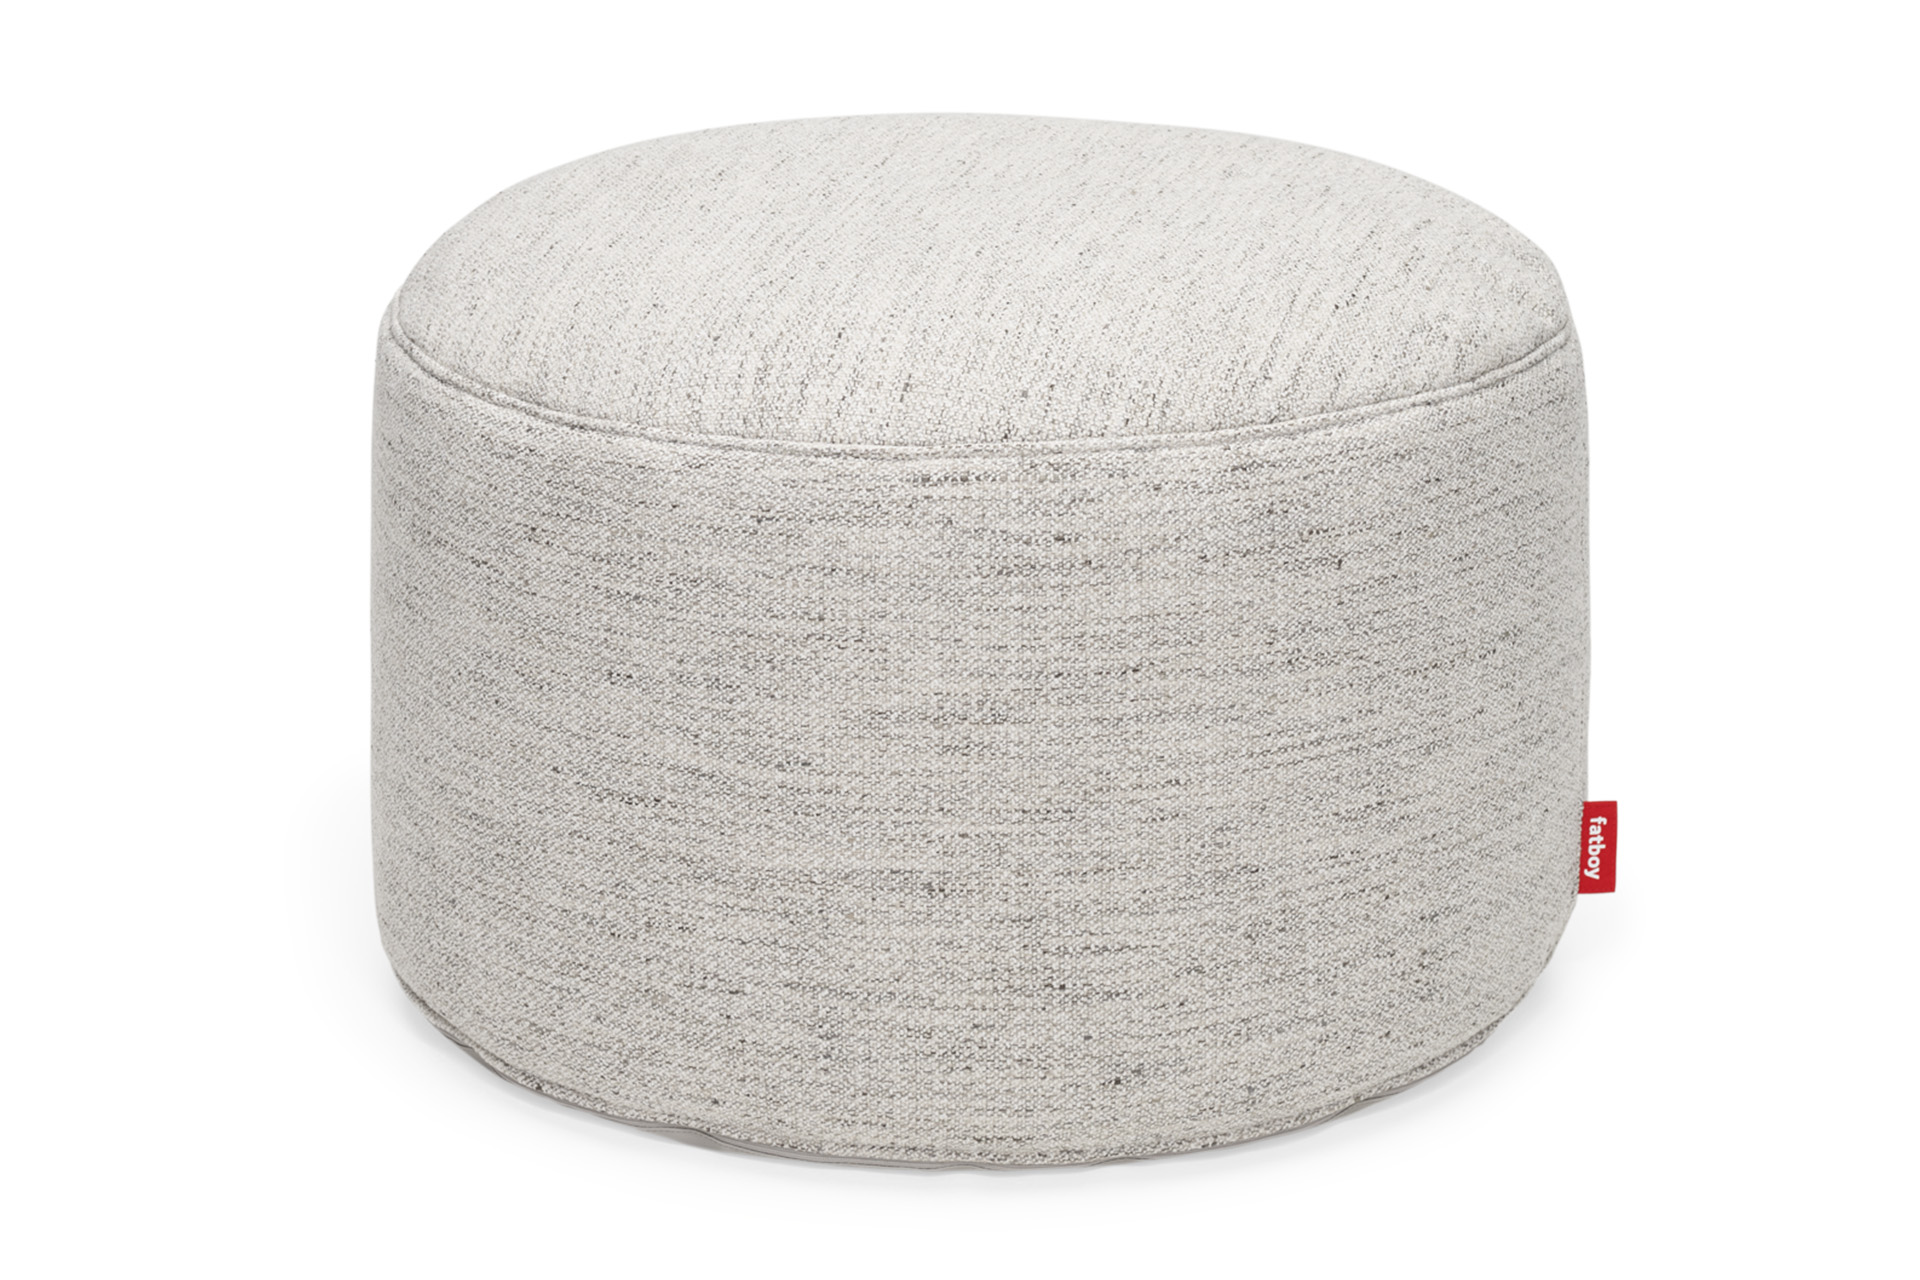 Eed Dierentuin verstoring Fatboy poufs for the bedroom or living room | Fatboy